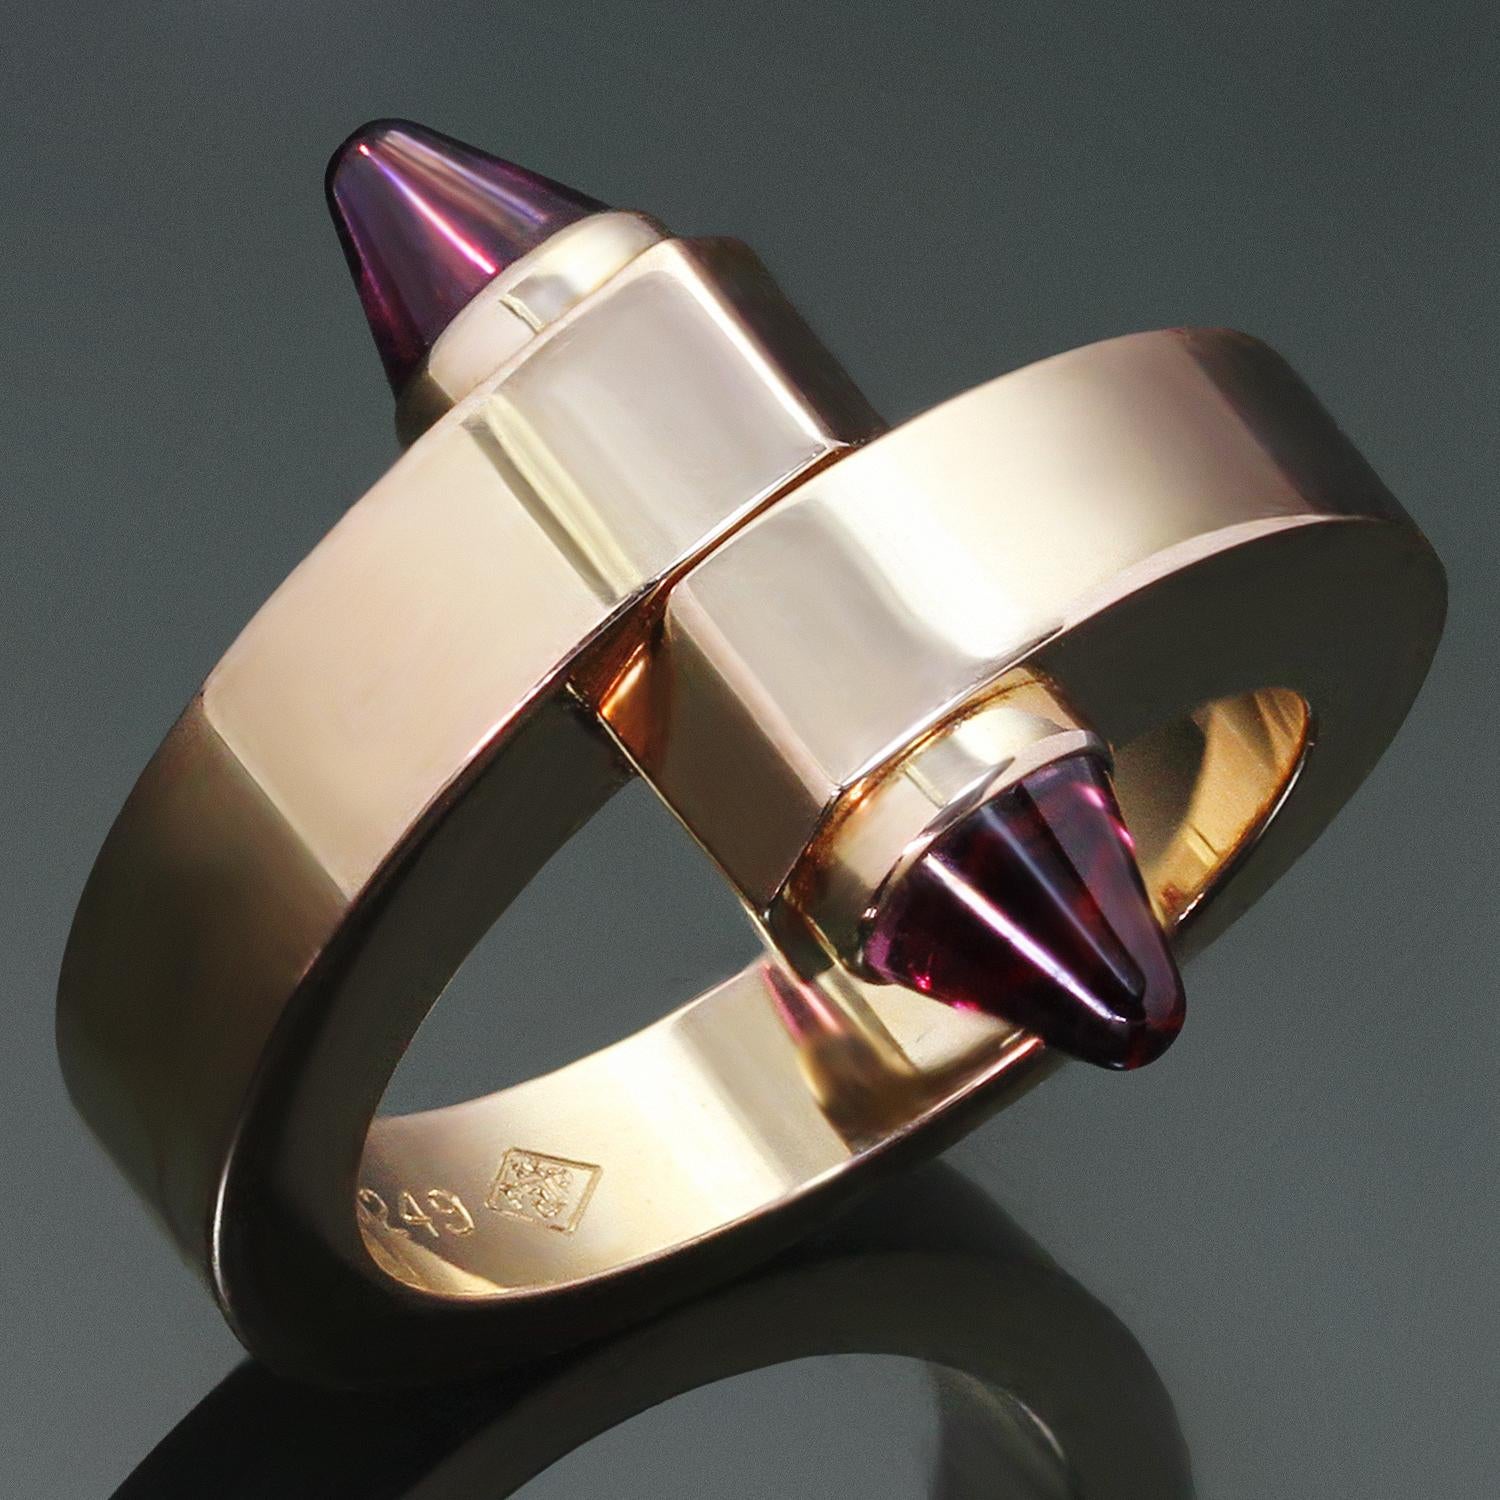 This gorgeous Cartier ring from the chic Menotte collection features a crossover design crafted in 18k rose gold and completed with bullet-cut cabochon amethyst tips. Made in France circa 2000s.  Measurements: 0.74